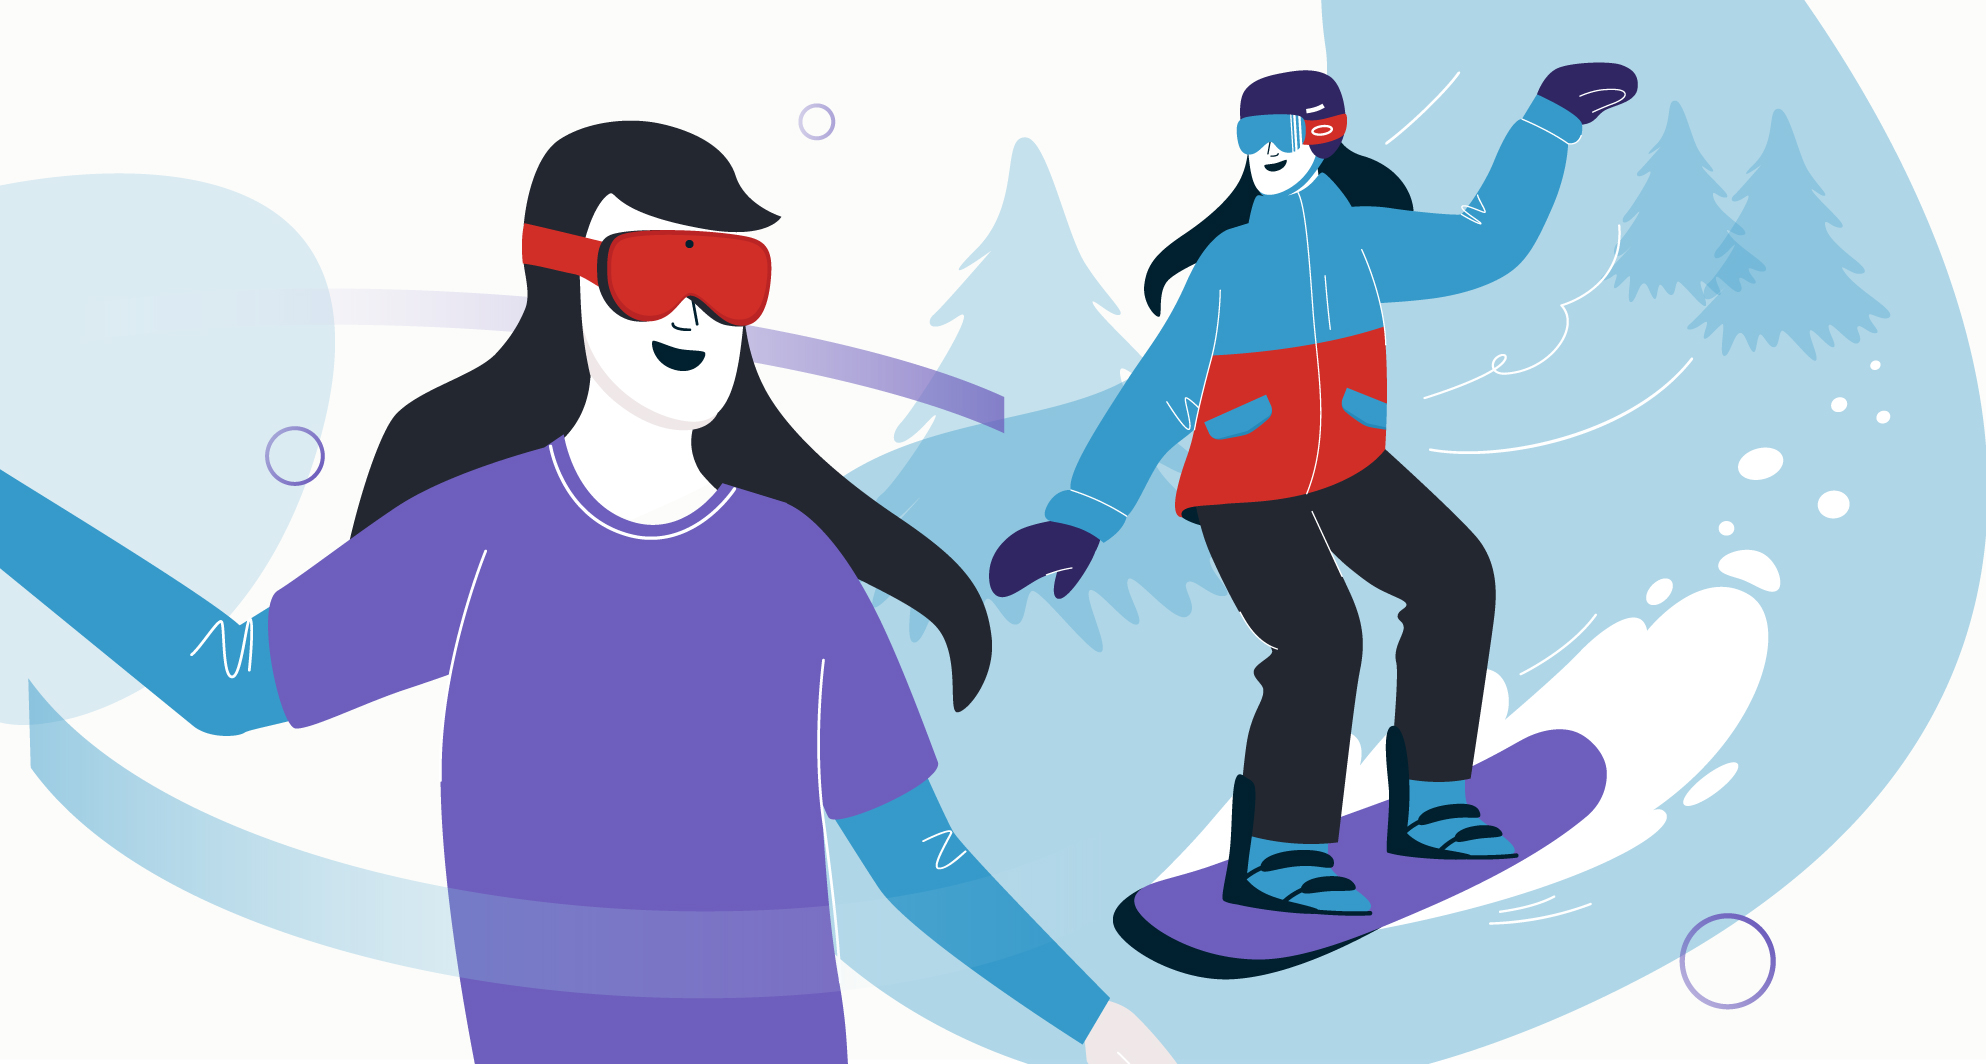  Comparison between an athlete snowboarding and a person using a virtual reality (VR) headset